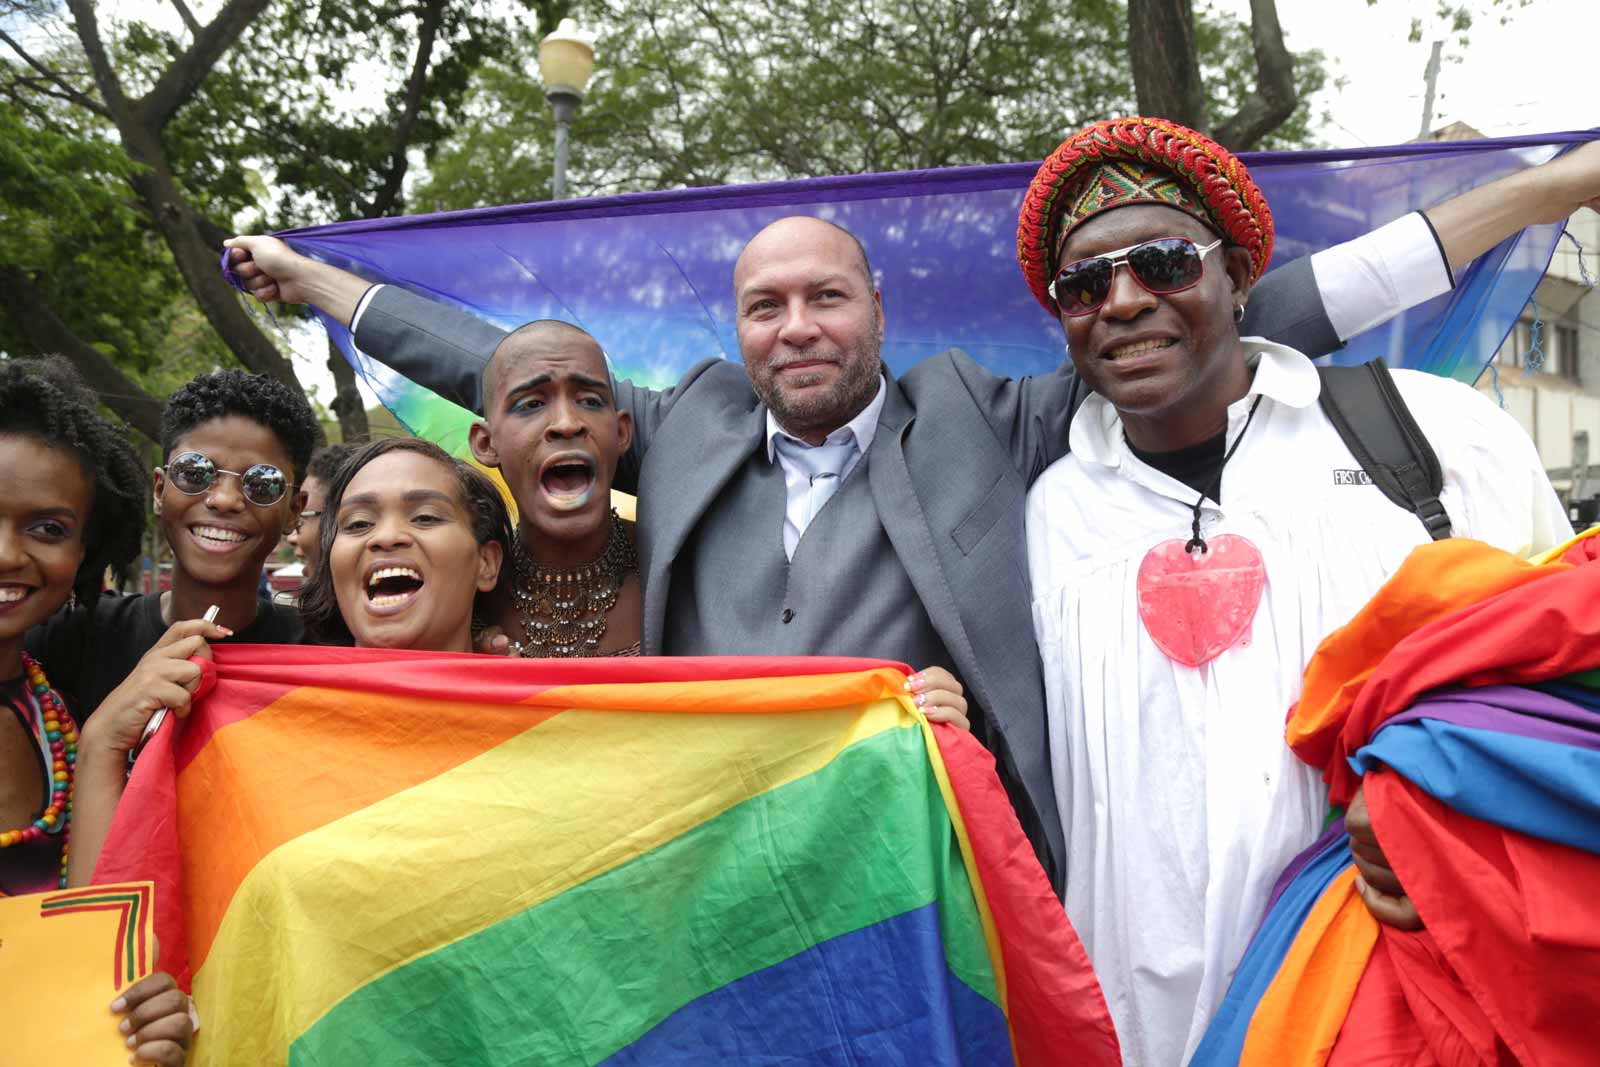 Activist Jason Jones celebrating with others after Trinidad and Tobago's High Court ruled against the country's anti-homosexual laws, outside the Hall of Justice, Port-of-Spain, Trinidad and Tobago, April 12, 2018